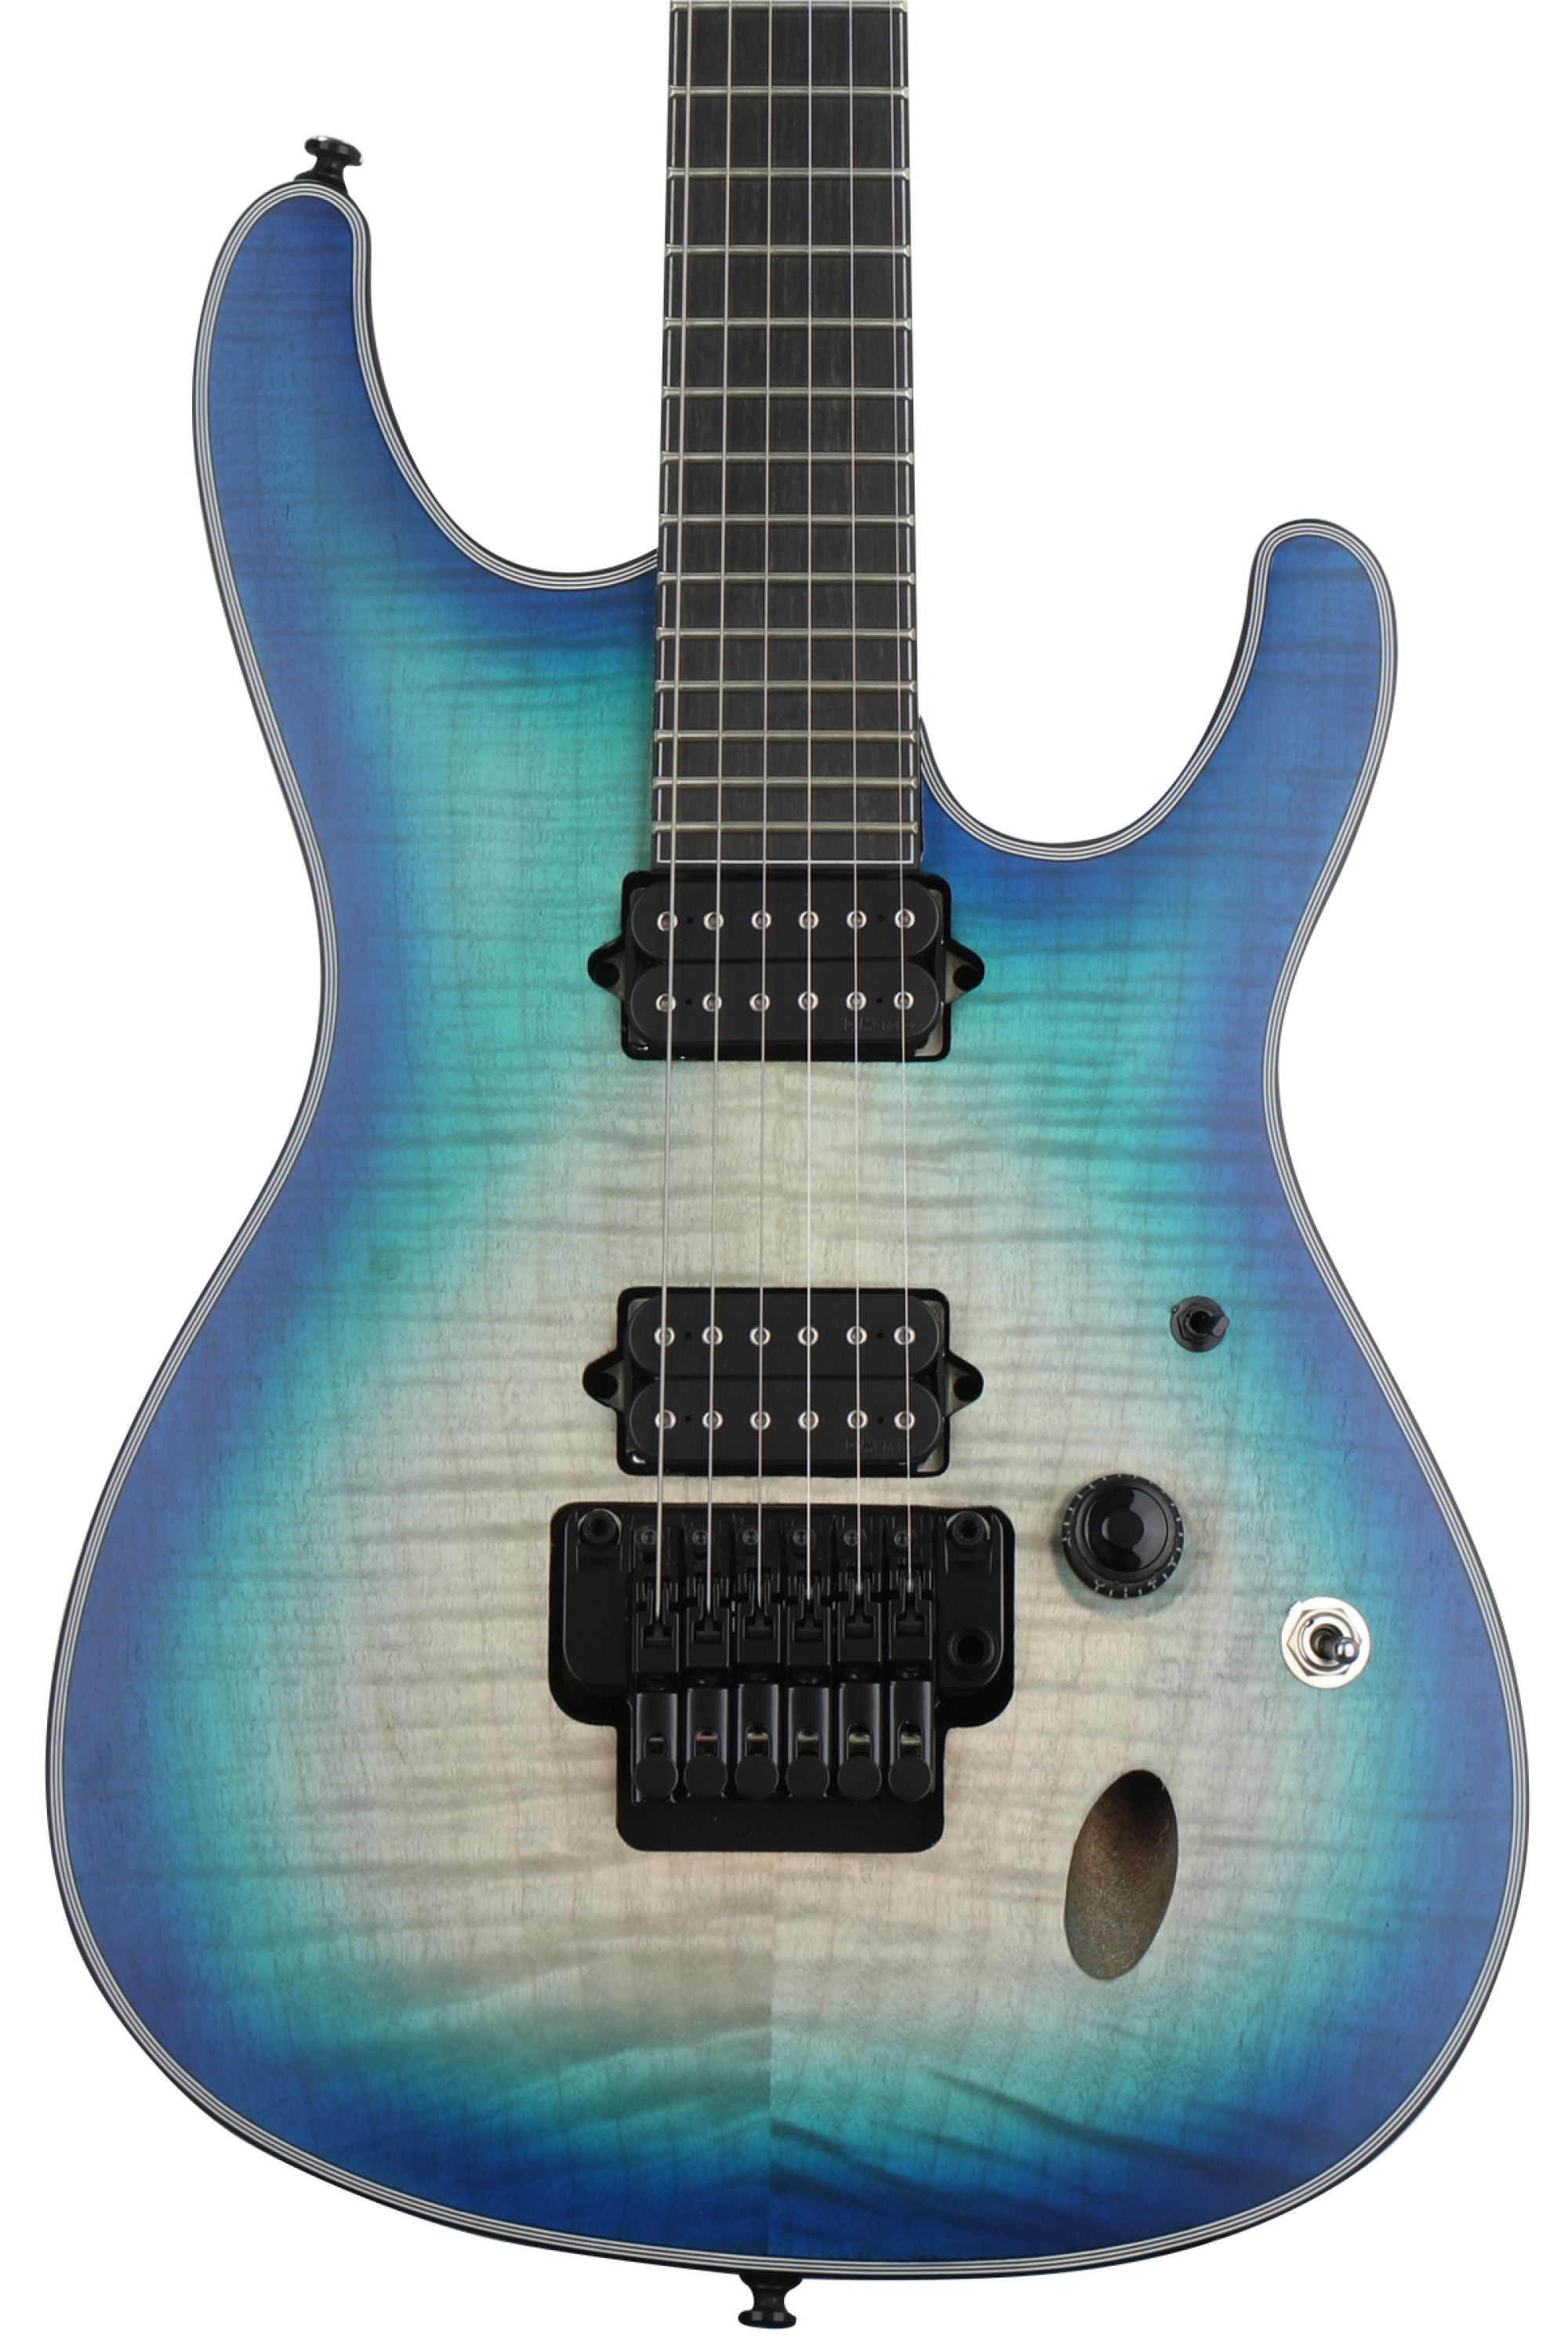 Ibanez S Series Iron Label SIX6DFM - Blue Space Burst | Sweetwater